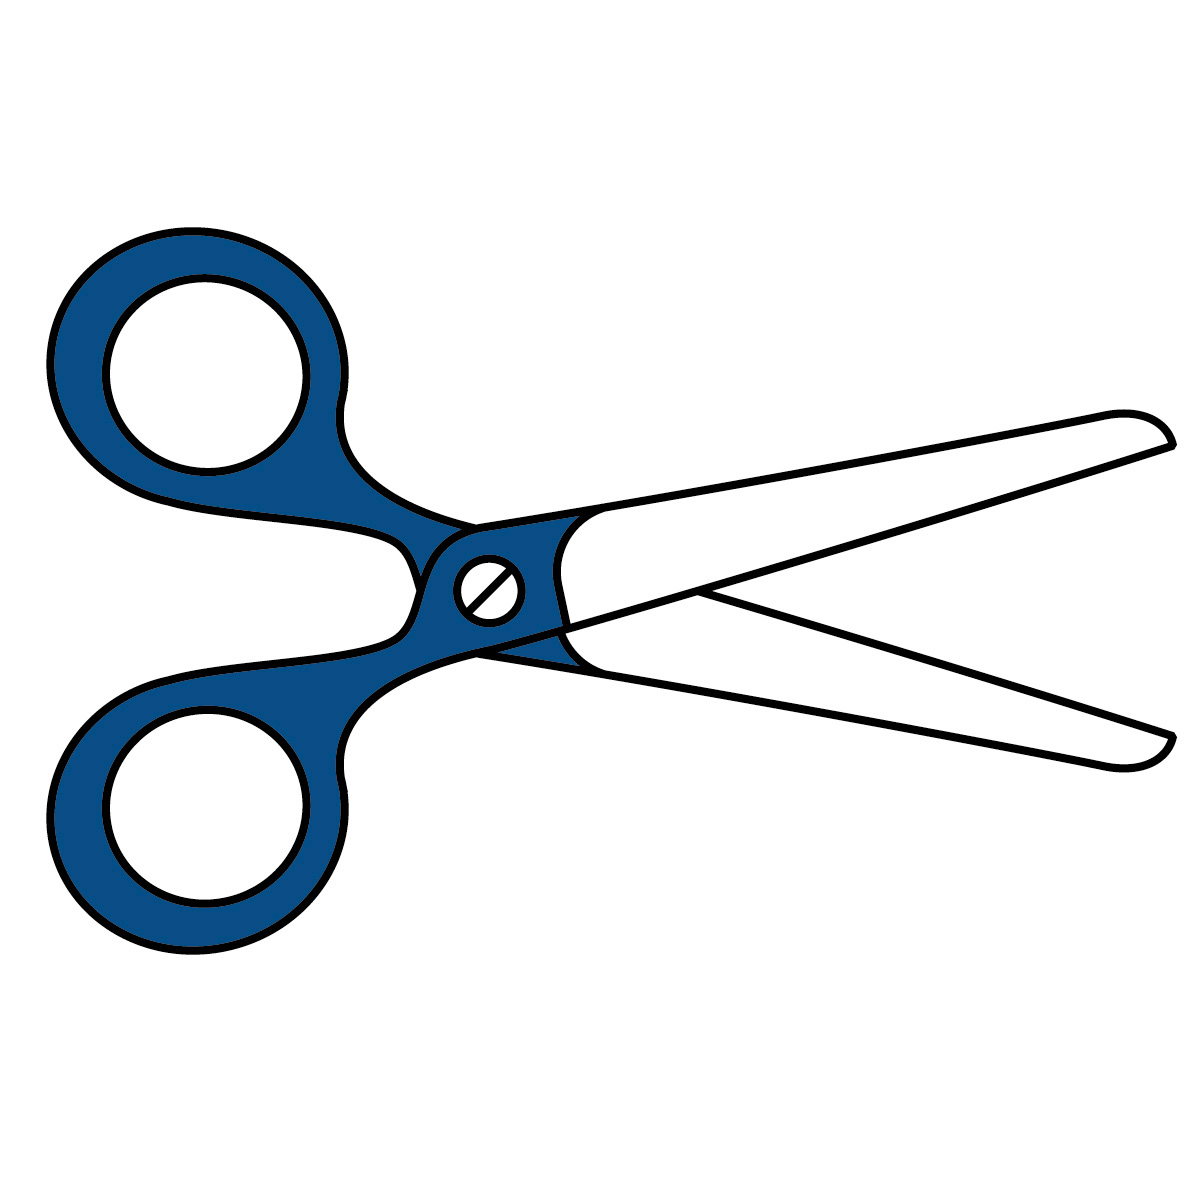 Scissors Clipart Black And White | Clipart Panda - Free Clipart Images